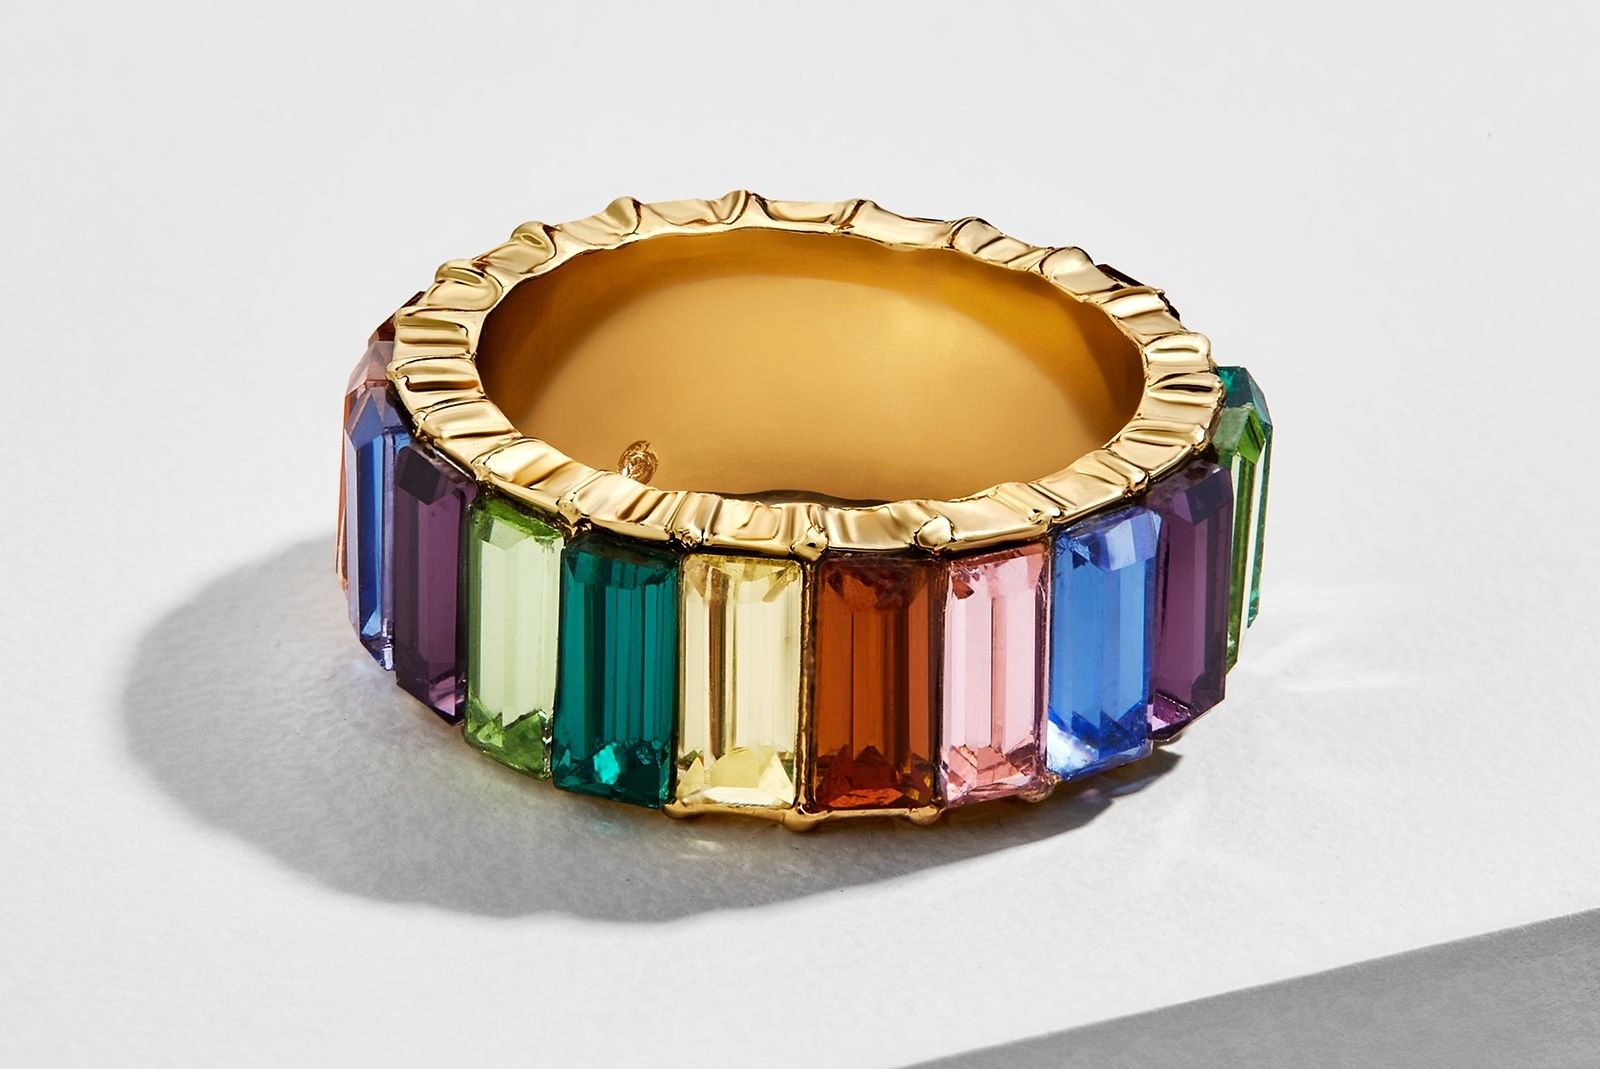 The 42 BaubleBar Alidia Ring That Had a 1,000 Person Waitlist Is